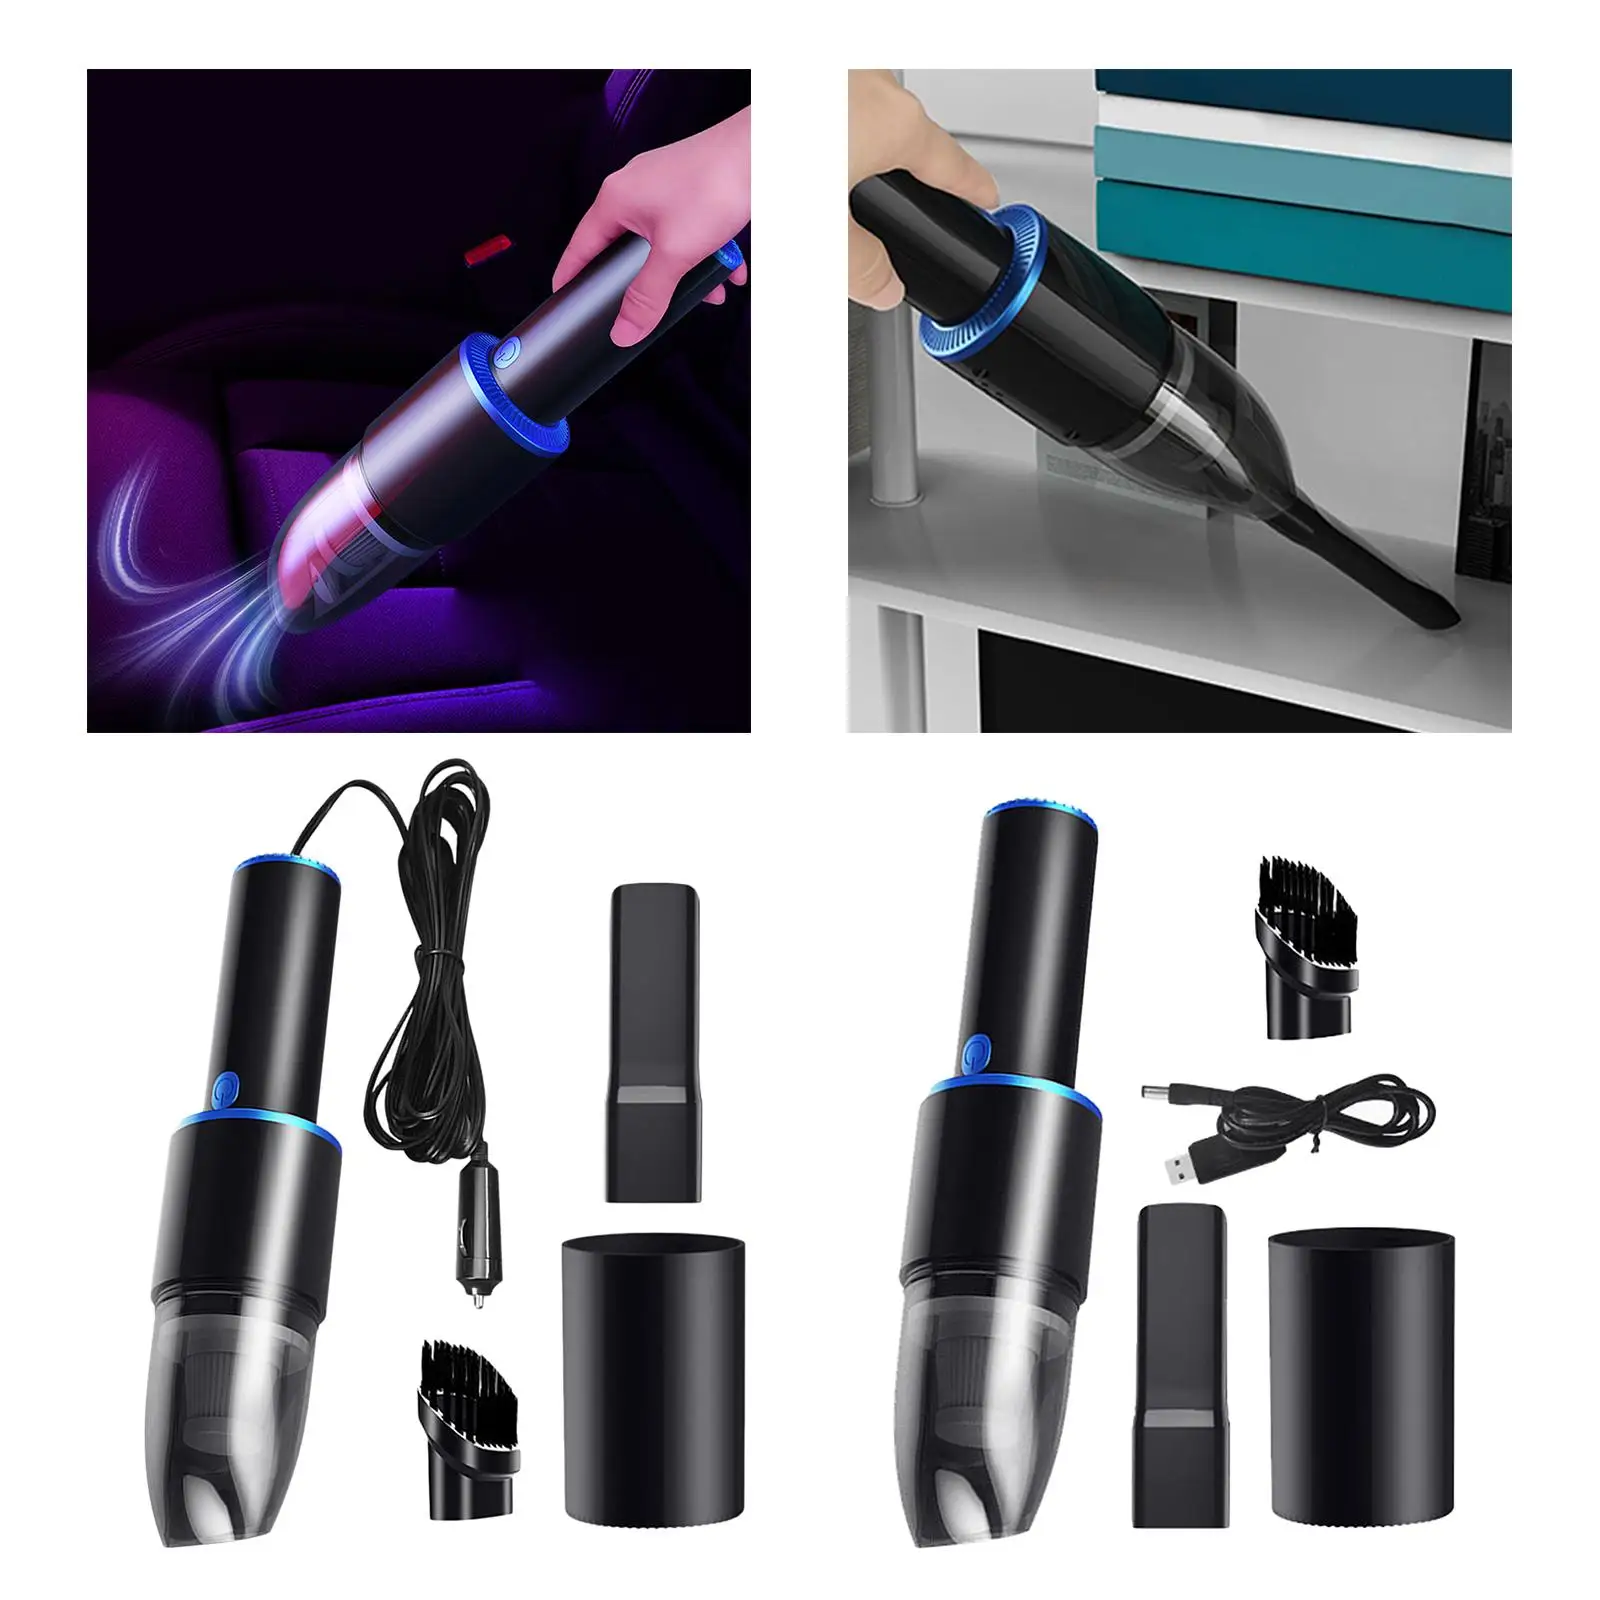 Handheld Cleaner 10000PA Reusable Portable Low Noise 4000mAh Cyclone Suction Fits for Home Use Office Seats Supplies Auto Parts